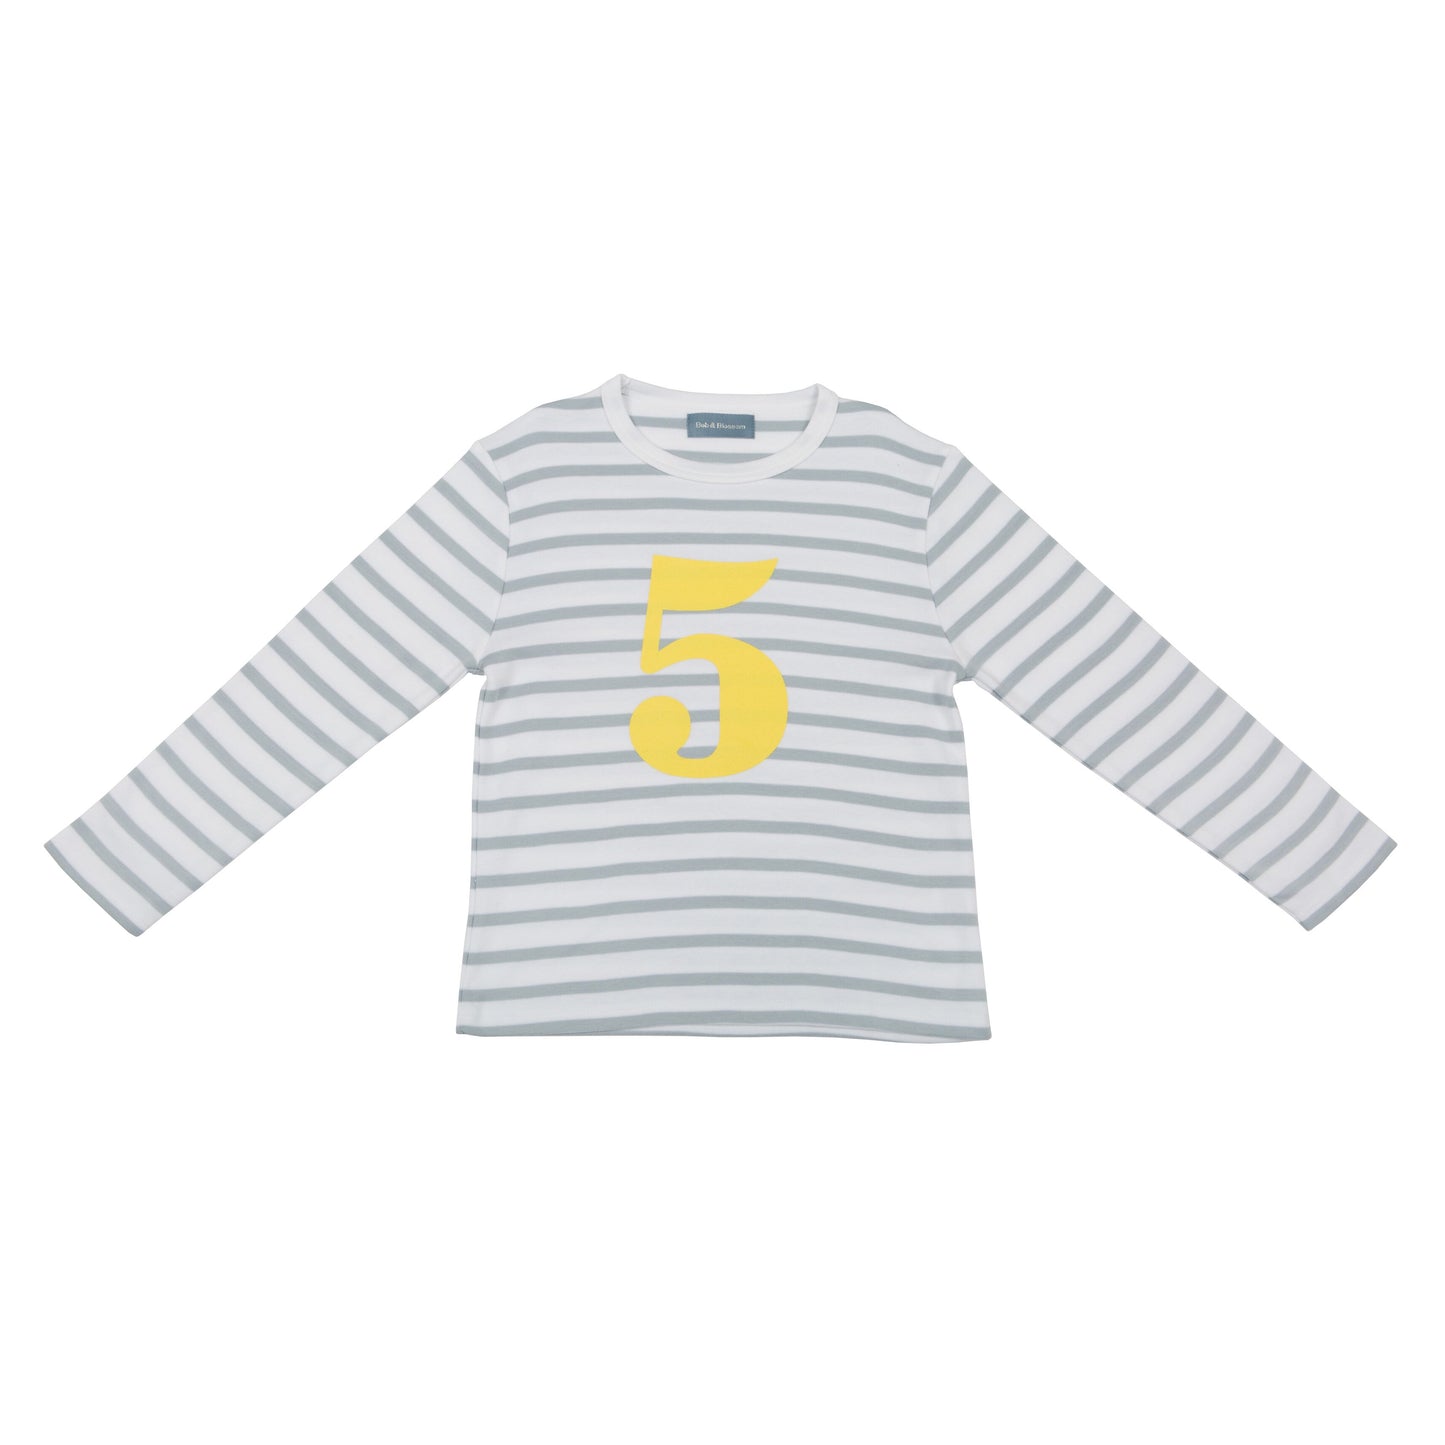 Bob & Blossom grey and white striped long sleeved t shirt with yellow number 3